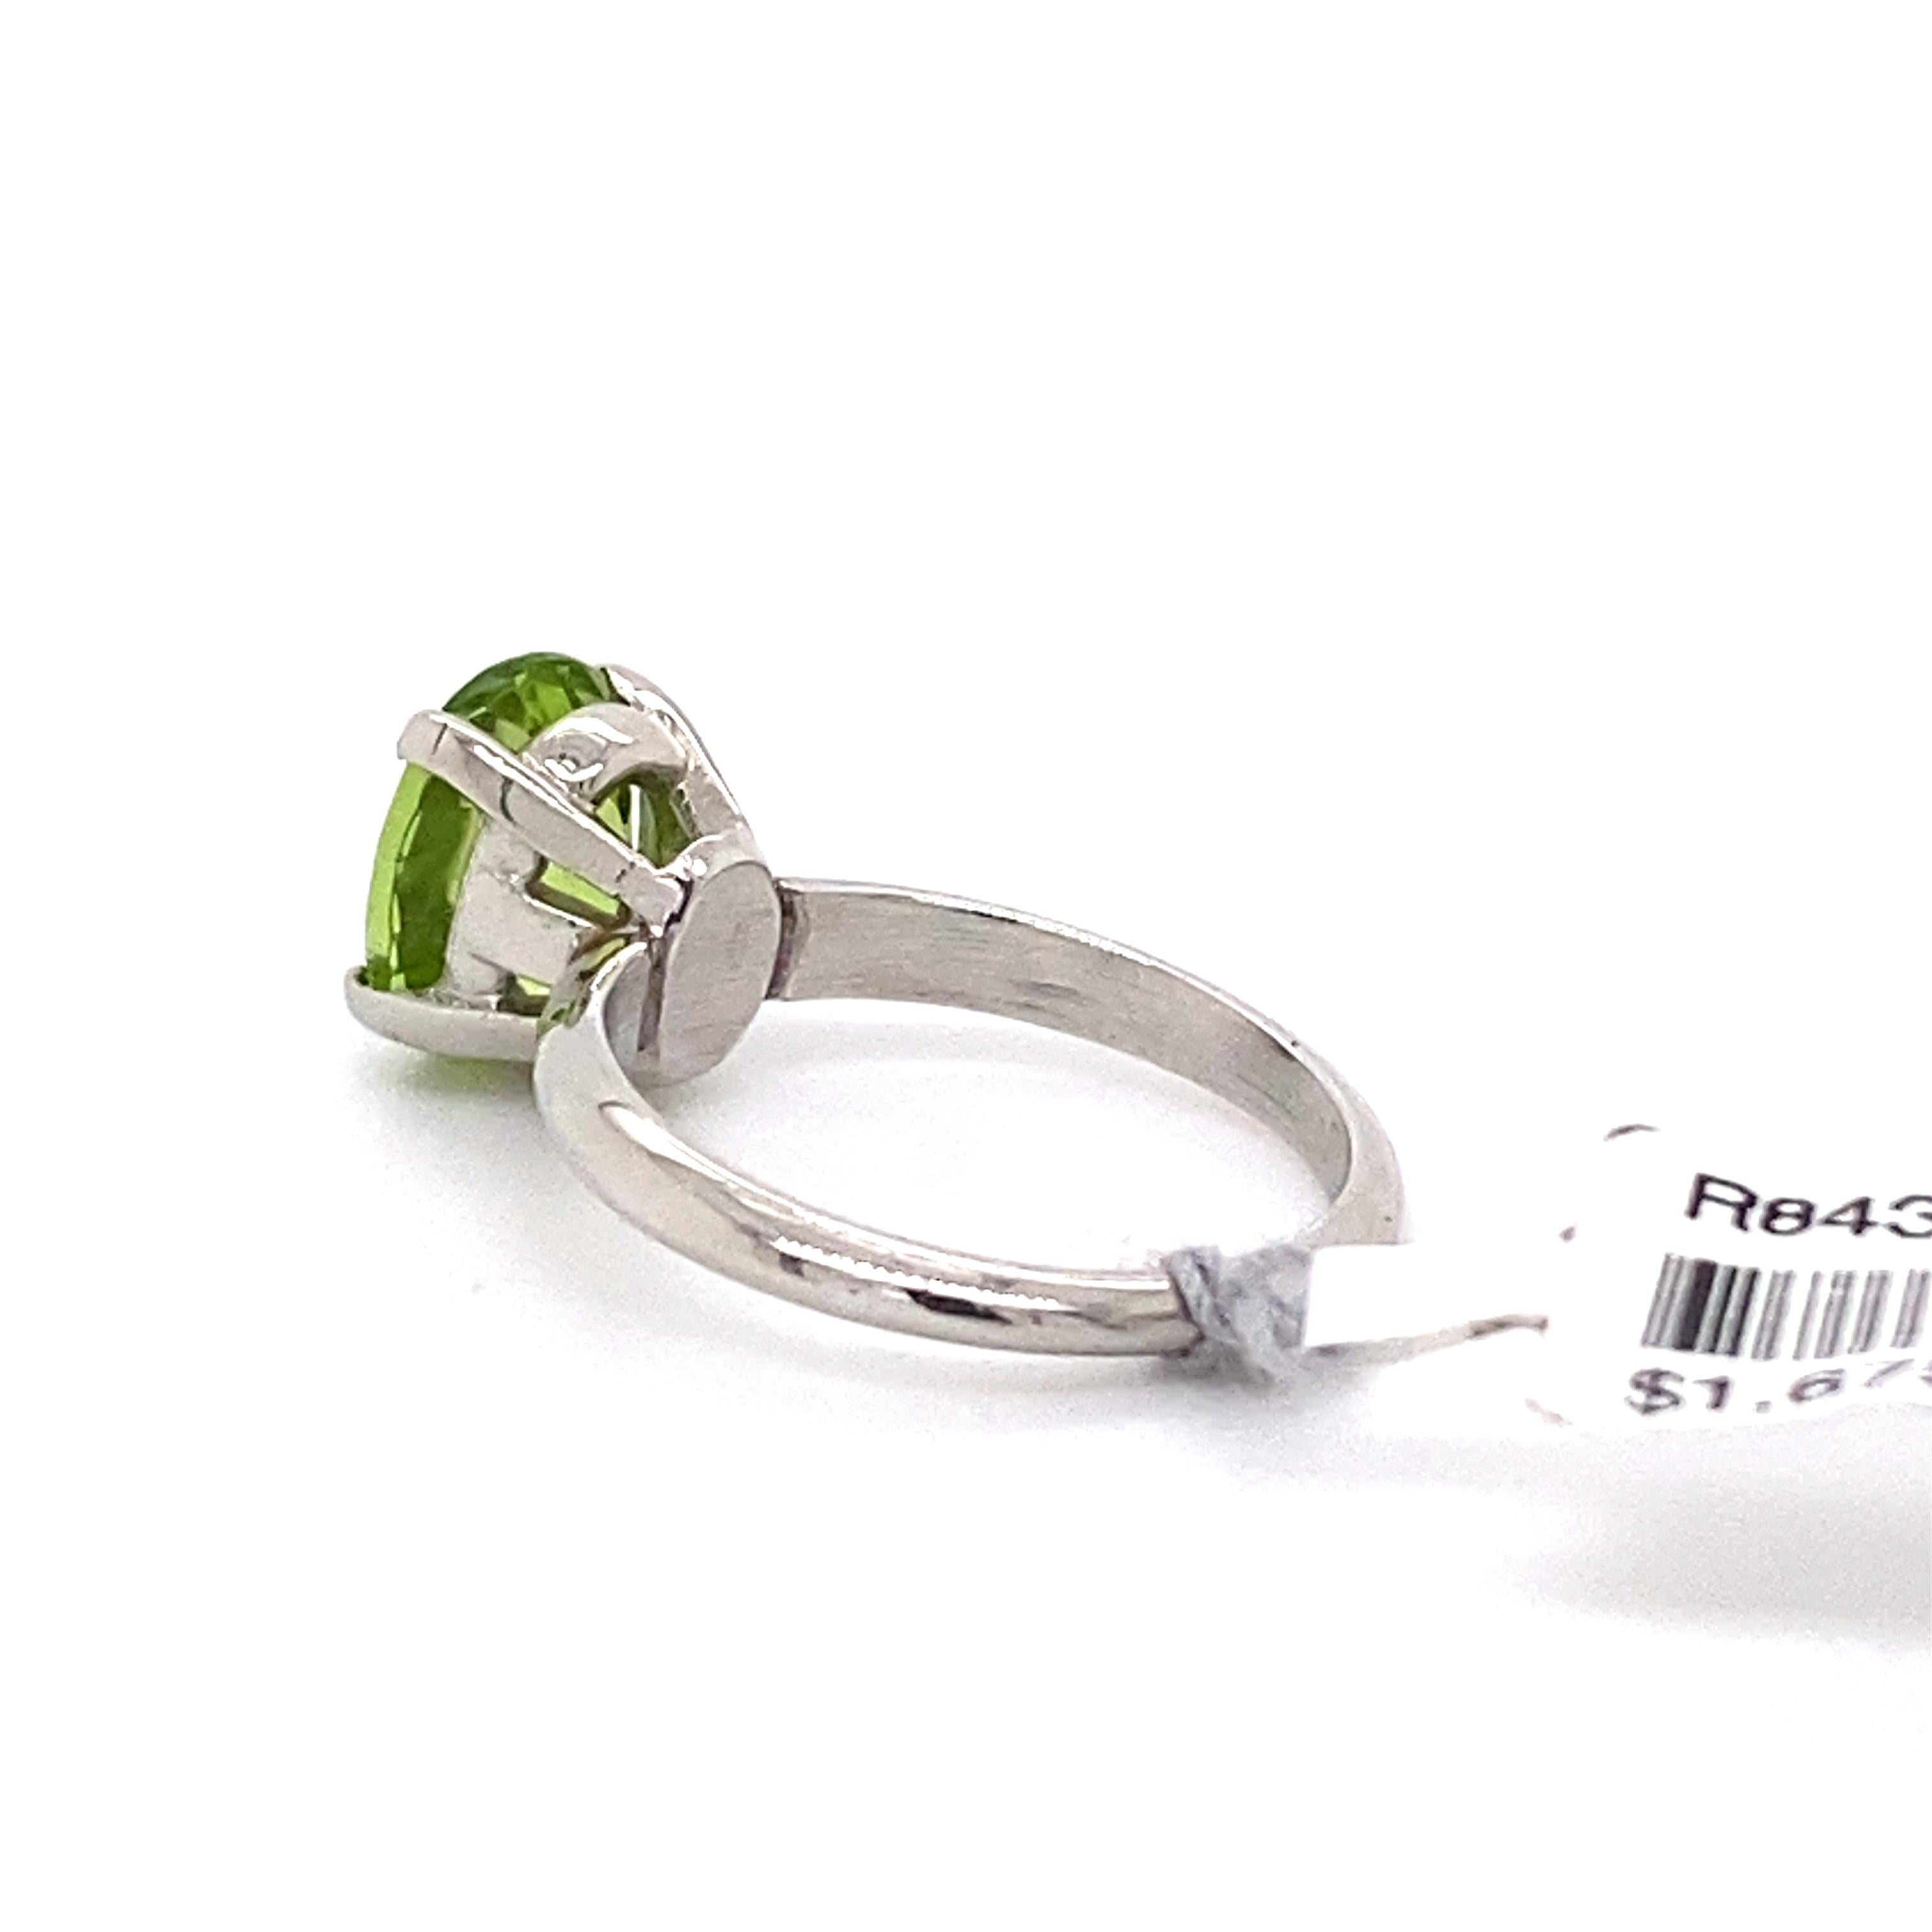 Oval Cut 1.75ct Peridot and Platinum Solitaire Ring